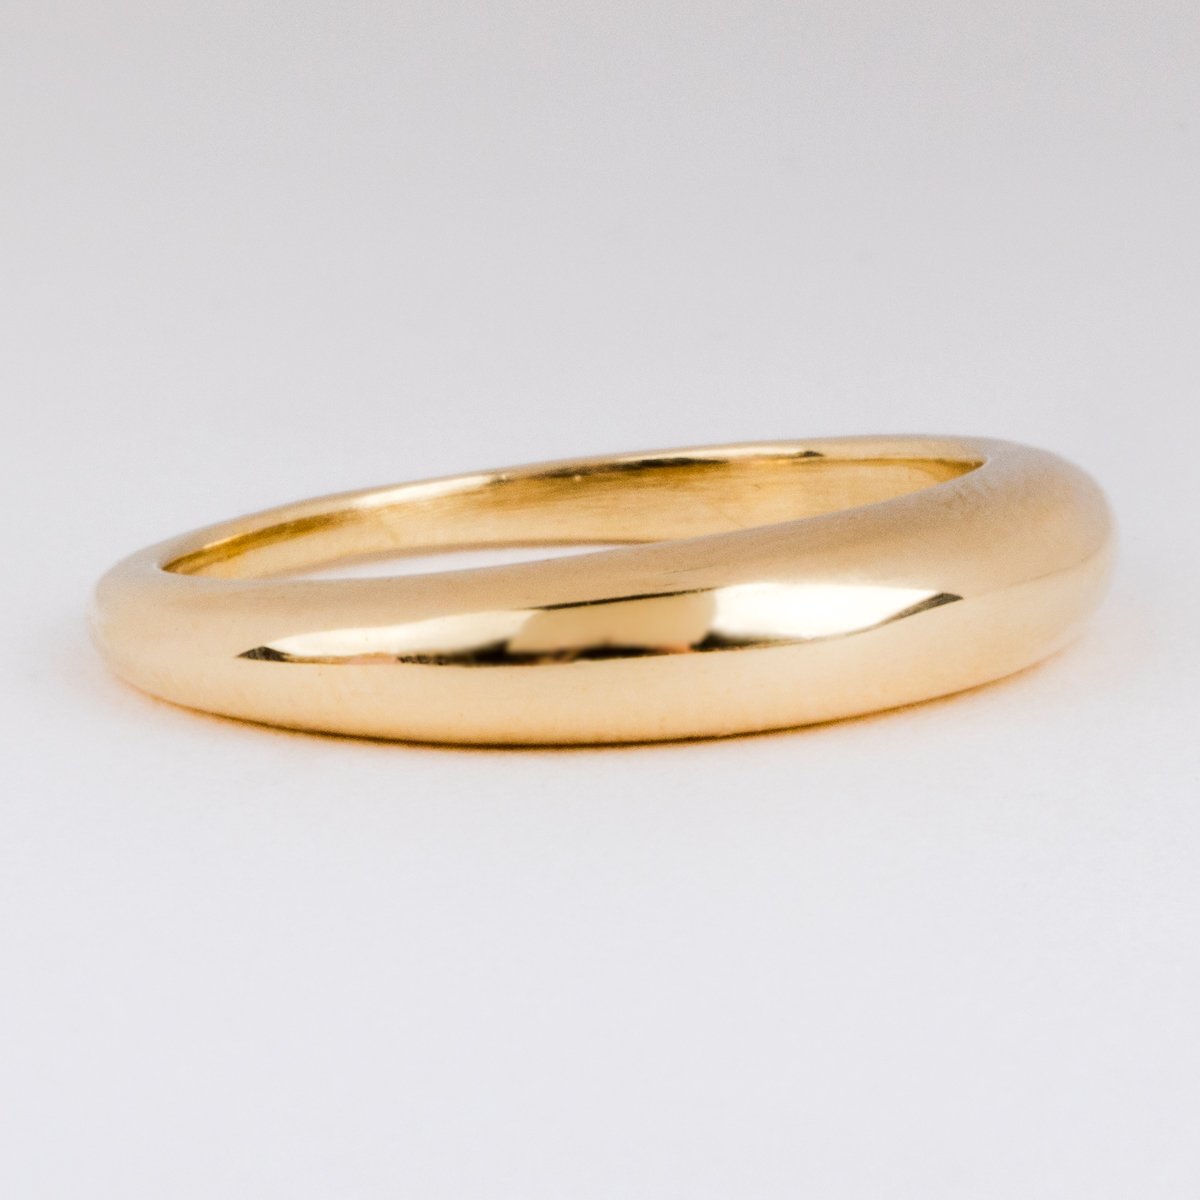 Pinky Promise Ring in Gold - rings - I Like it Here Club local eclectic